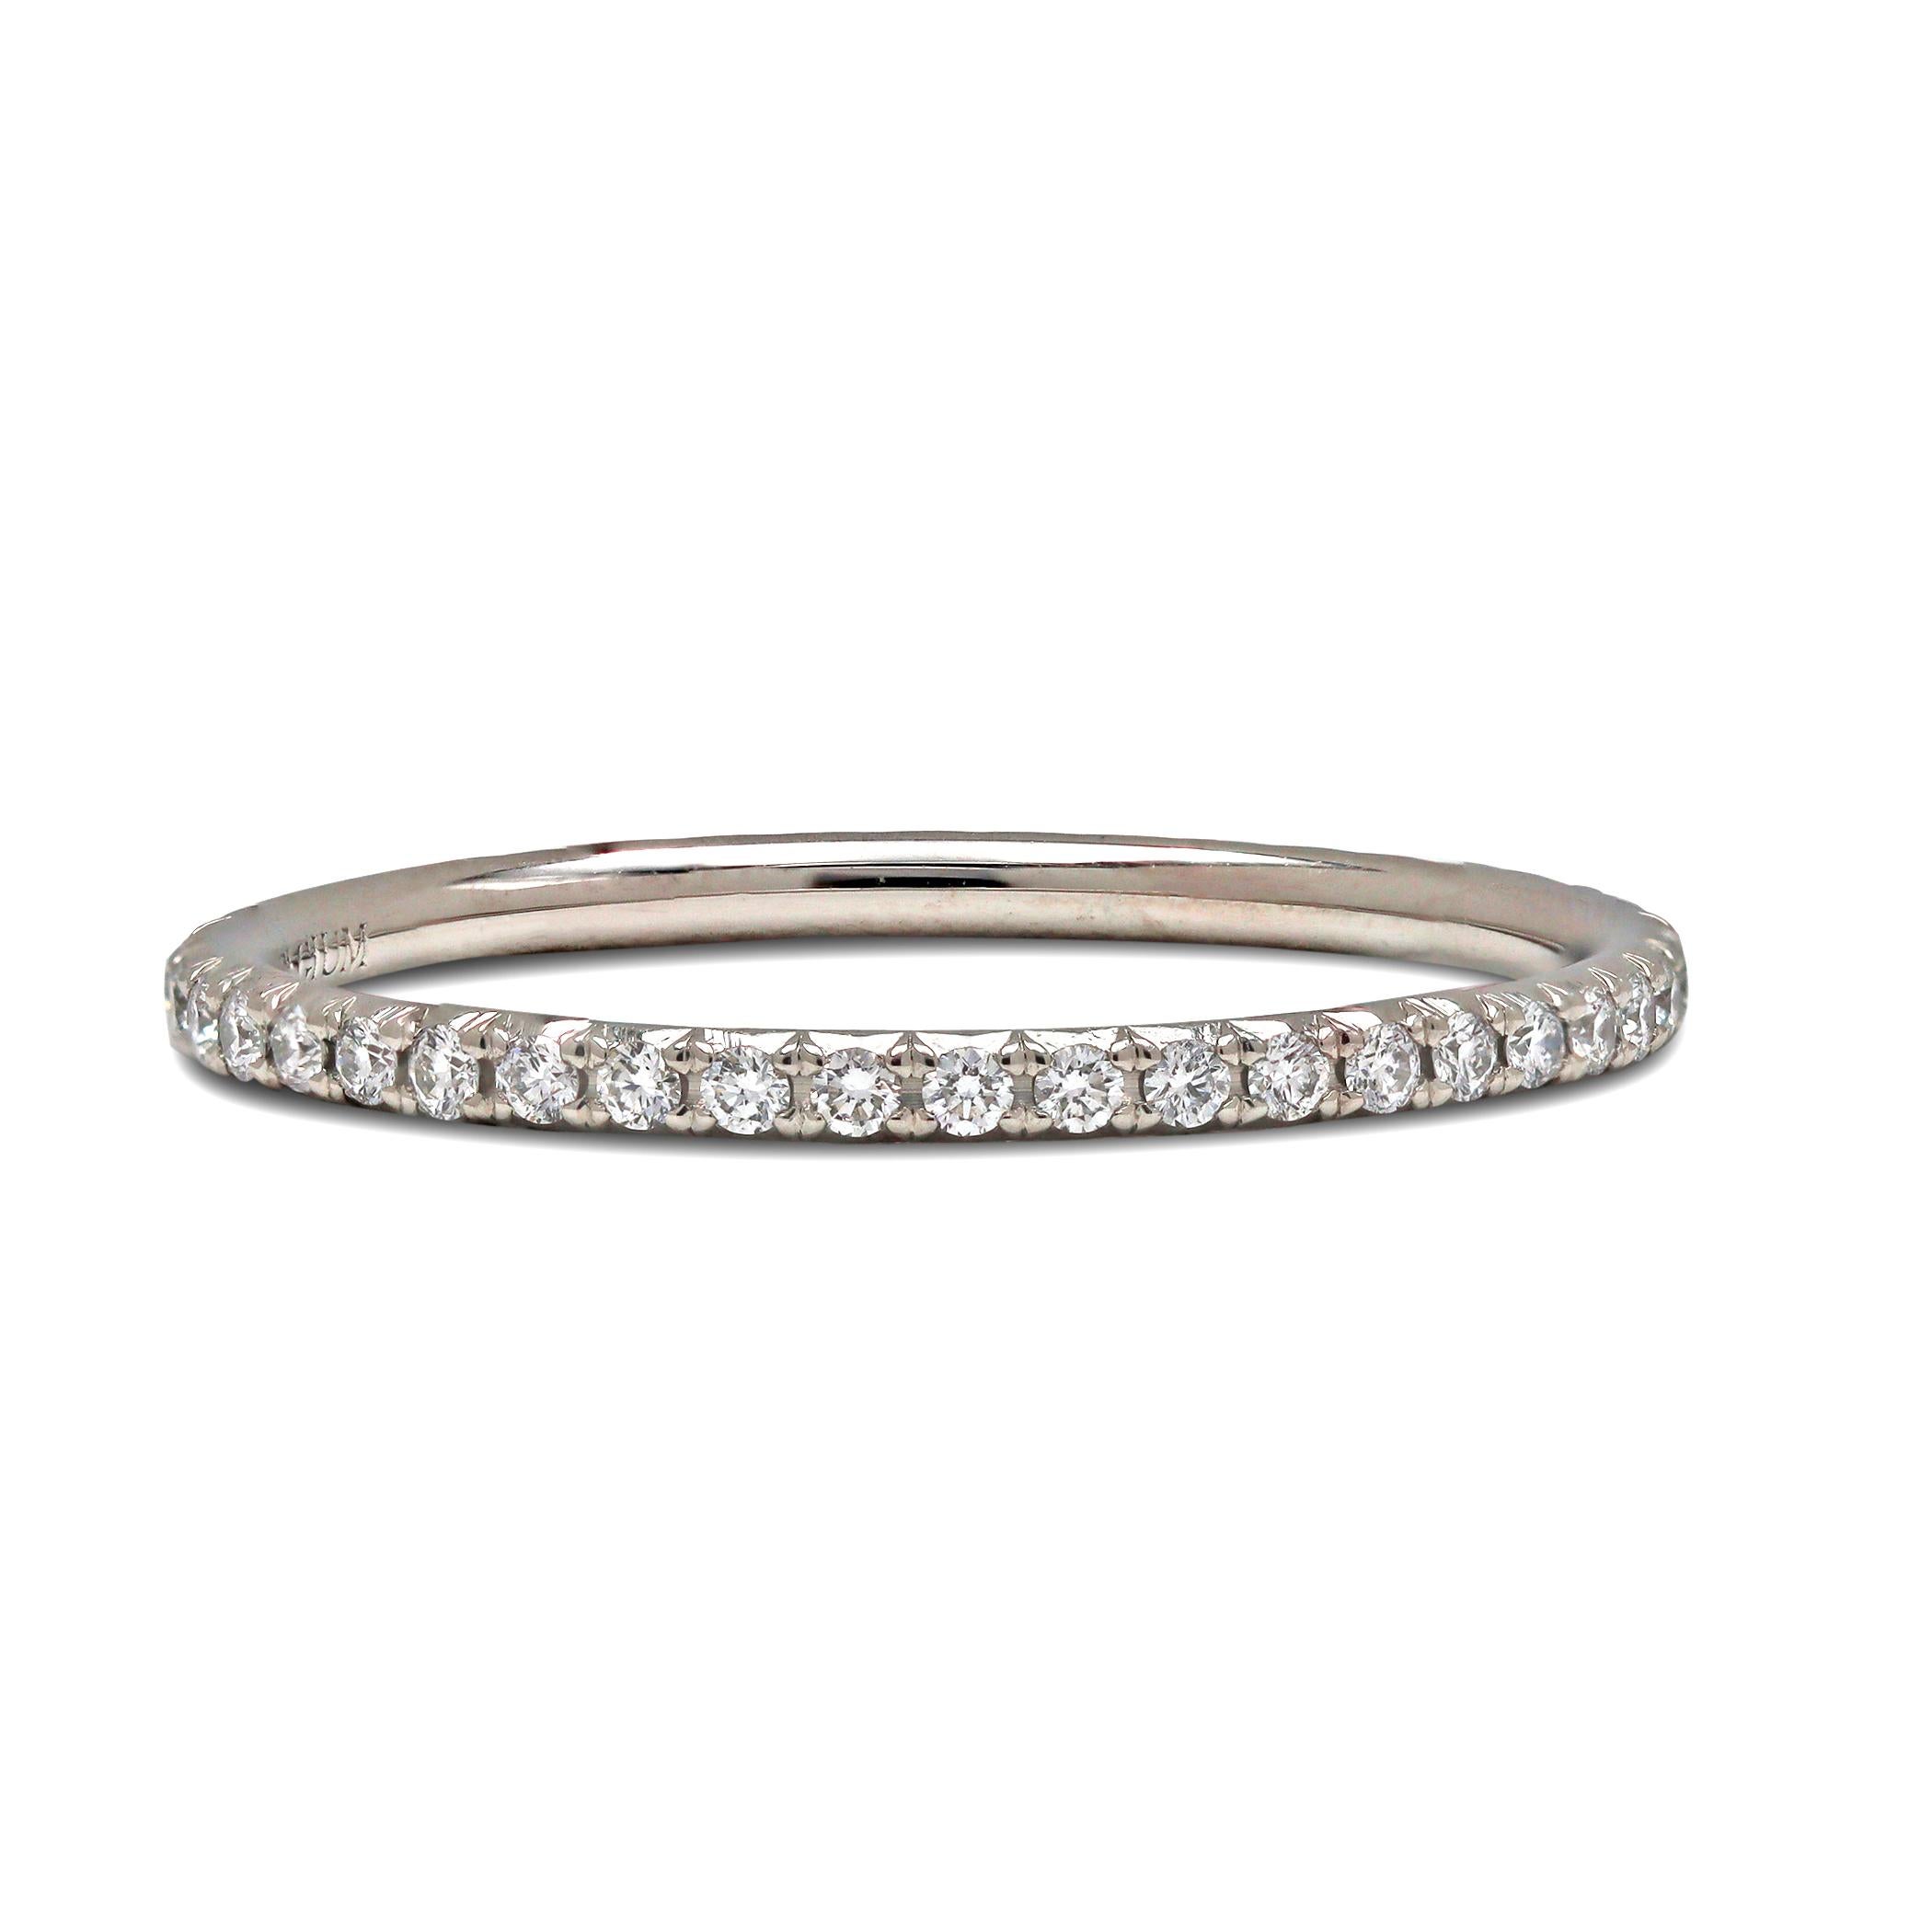 Authentic Tiffany & Co. 'Soleste' eternity band crafted in platinum and set with approximately 0.42 carats of glittering round brilliant cut diamonds. US Size 6 1/2. Signed Tiffany & Co., PT950, Belgium. Ring is presented without the original box